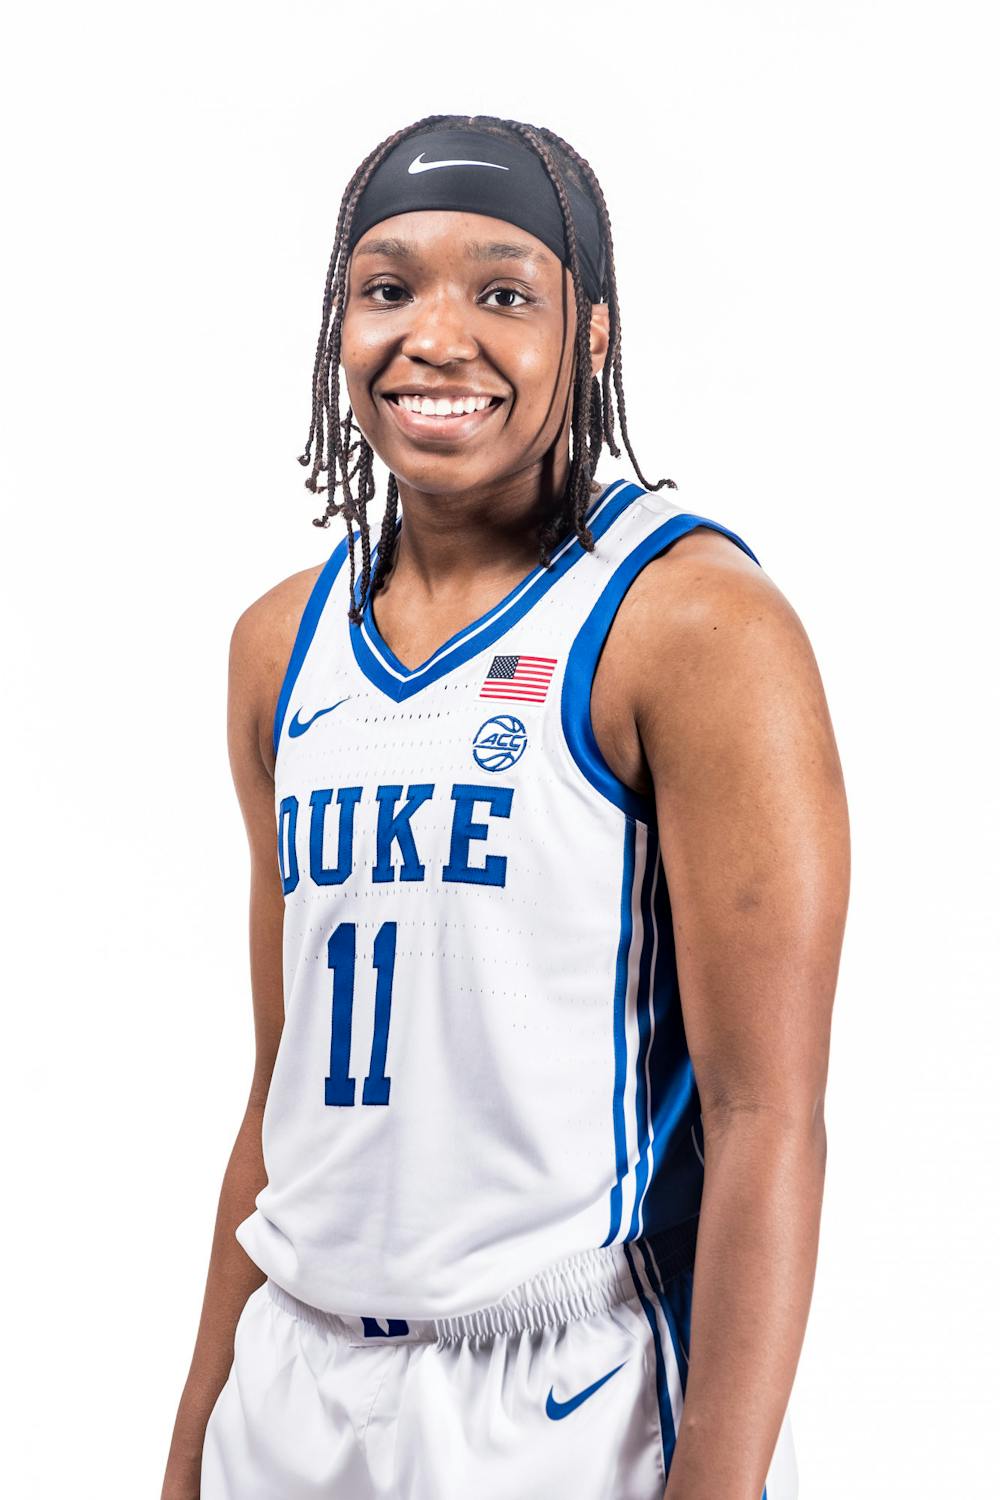 Jordyn Oliver's tournament experience will be important in Duke's high-leverage games this season.